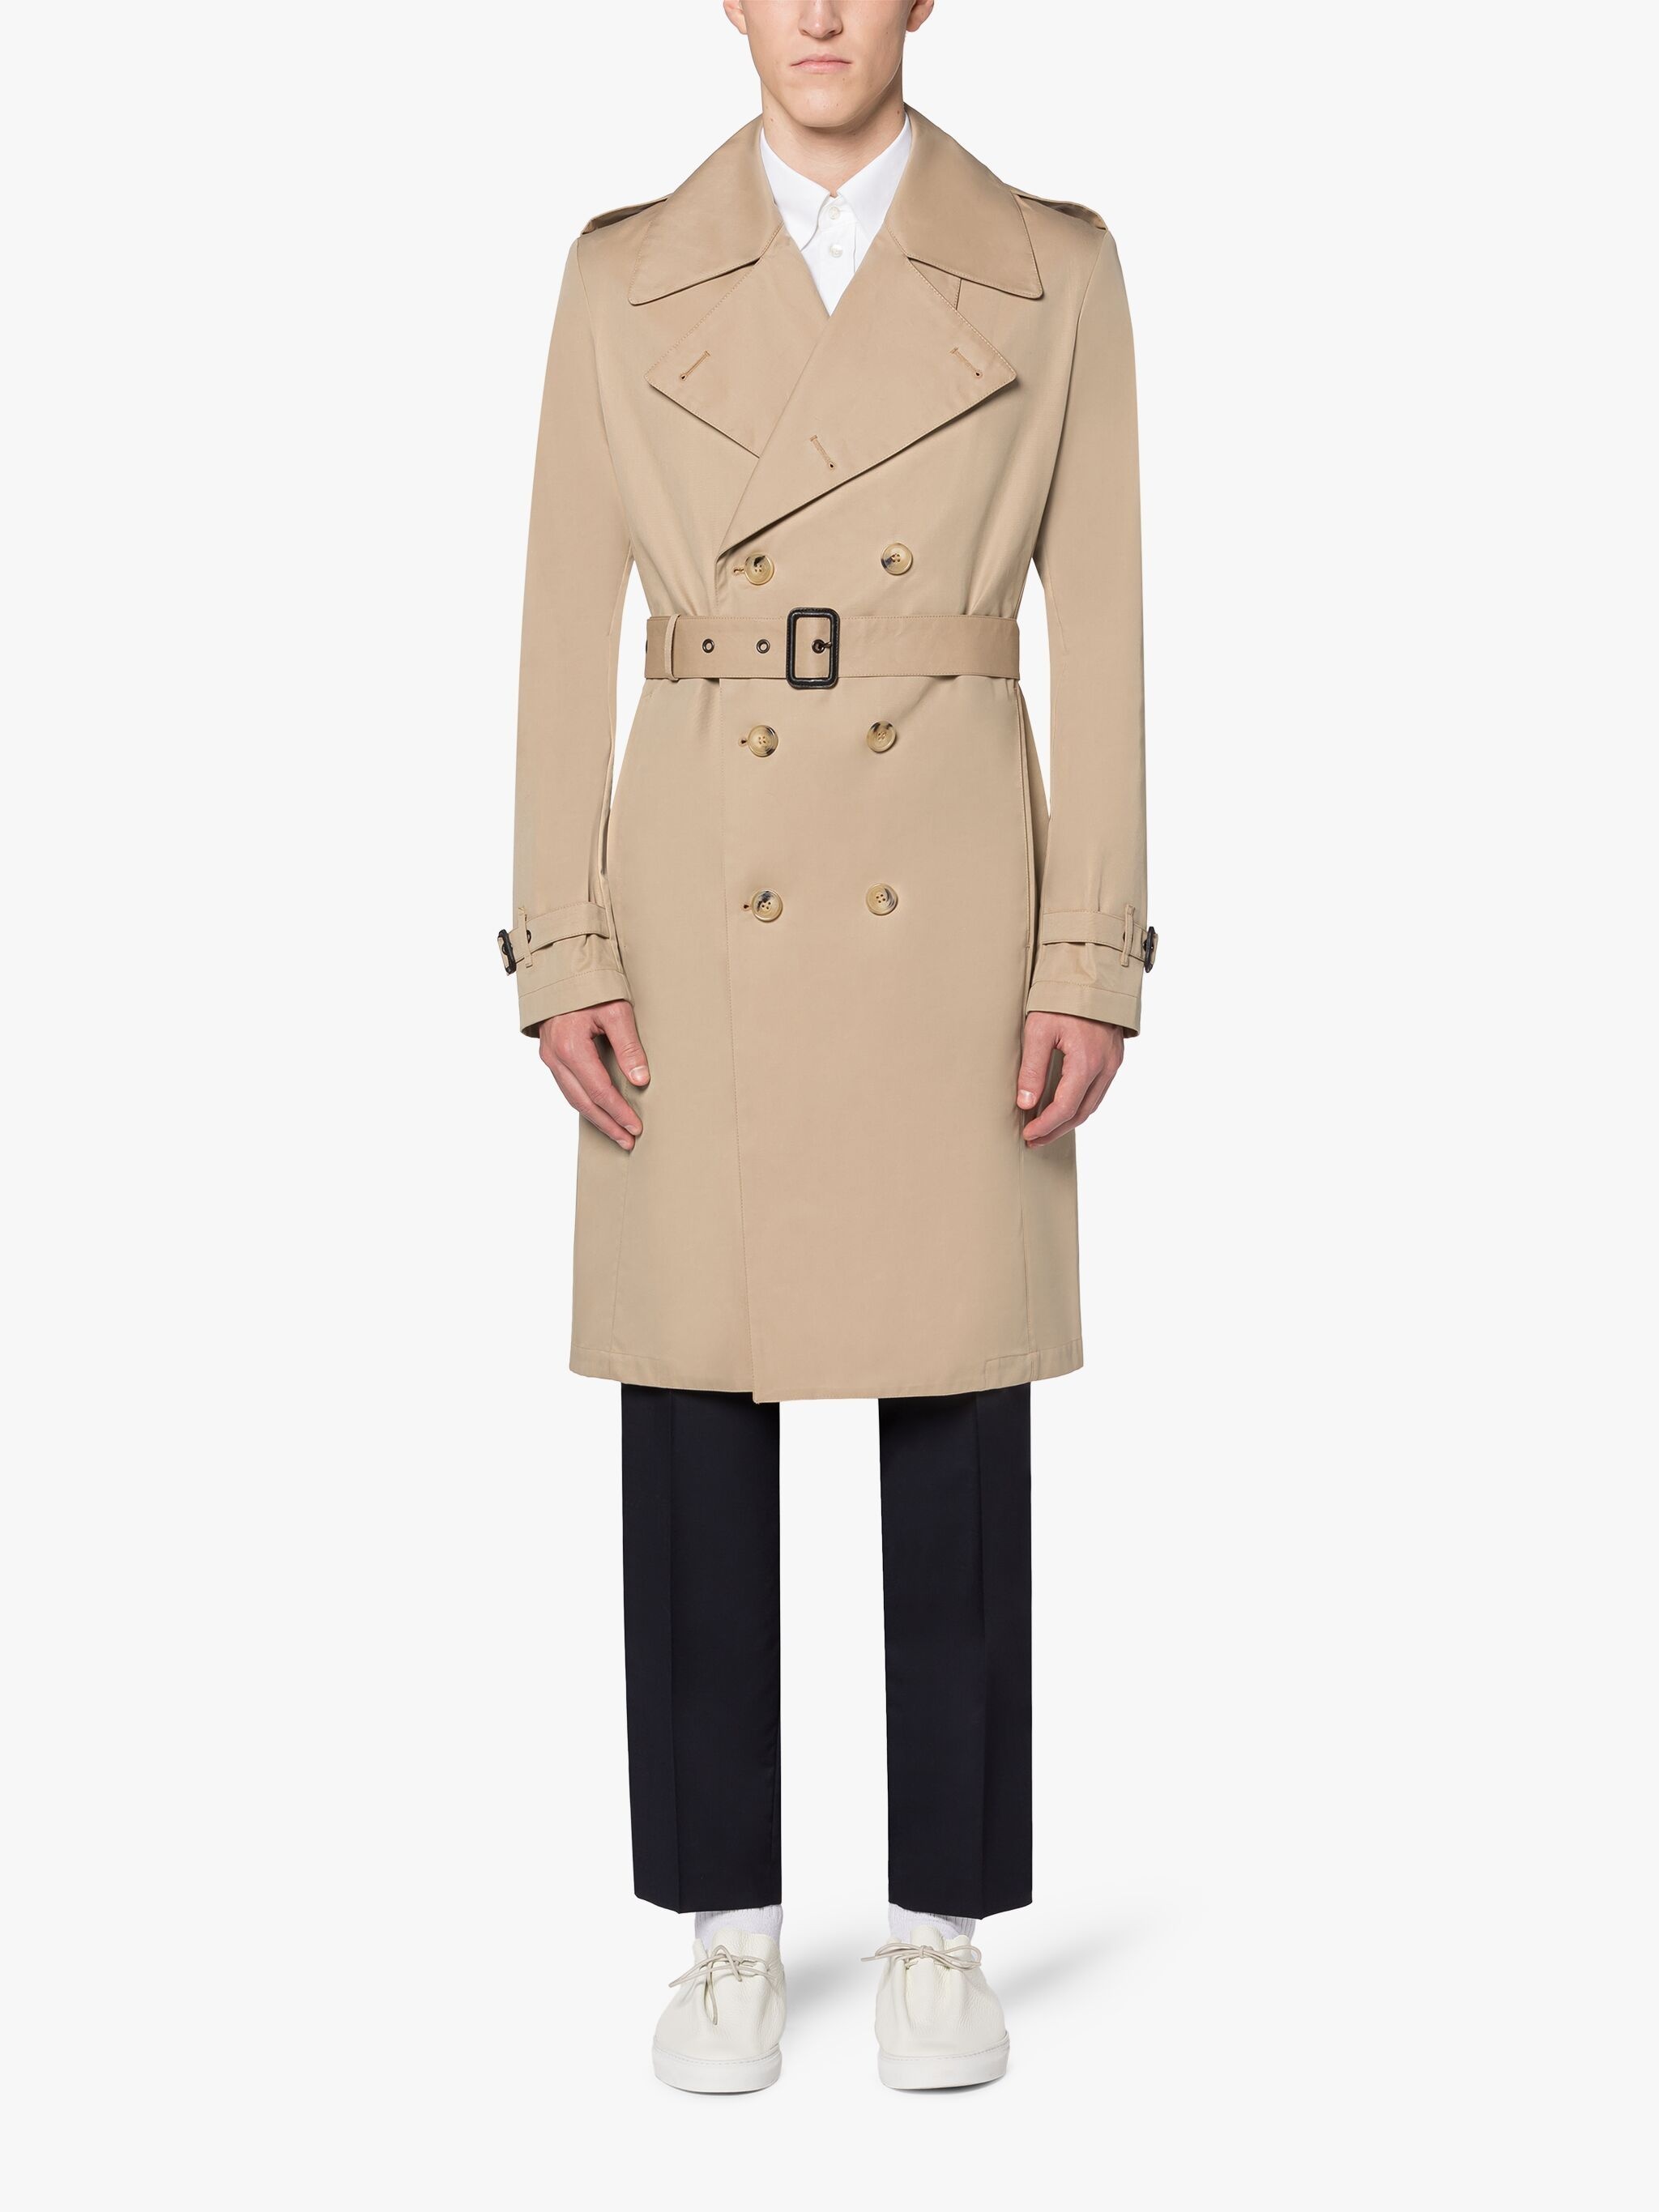 ST ANDREWS SAND COTTON TRENCH COAT - 2